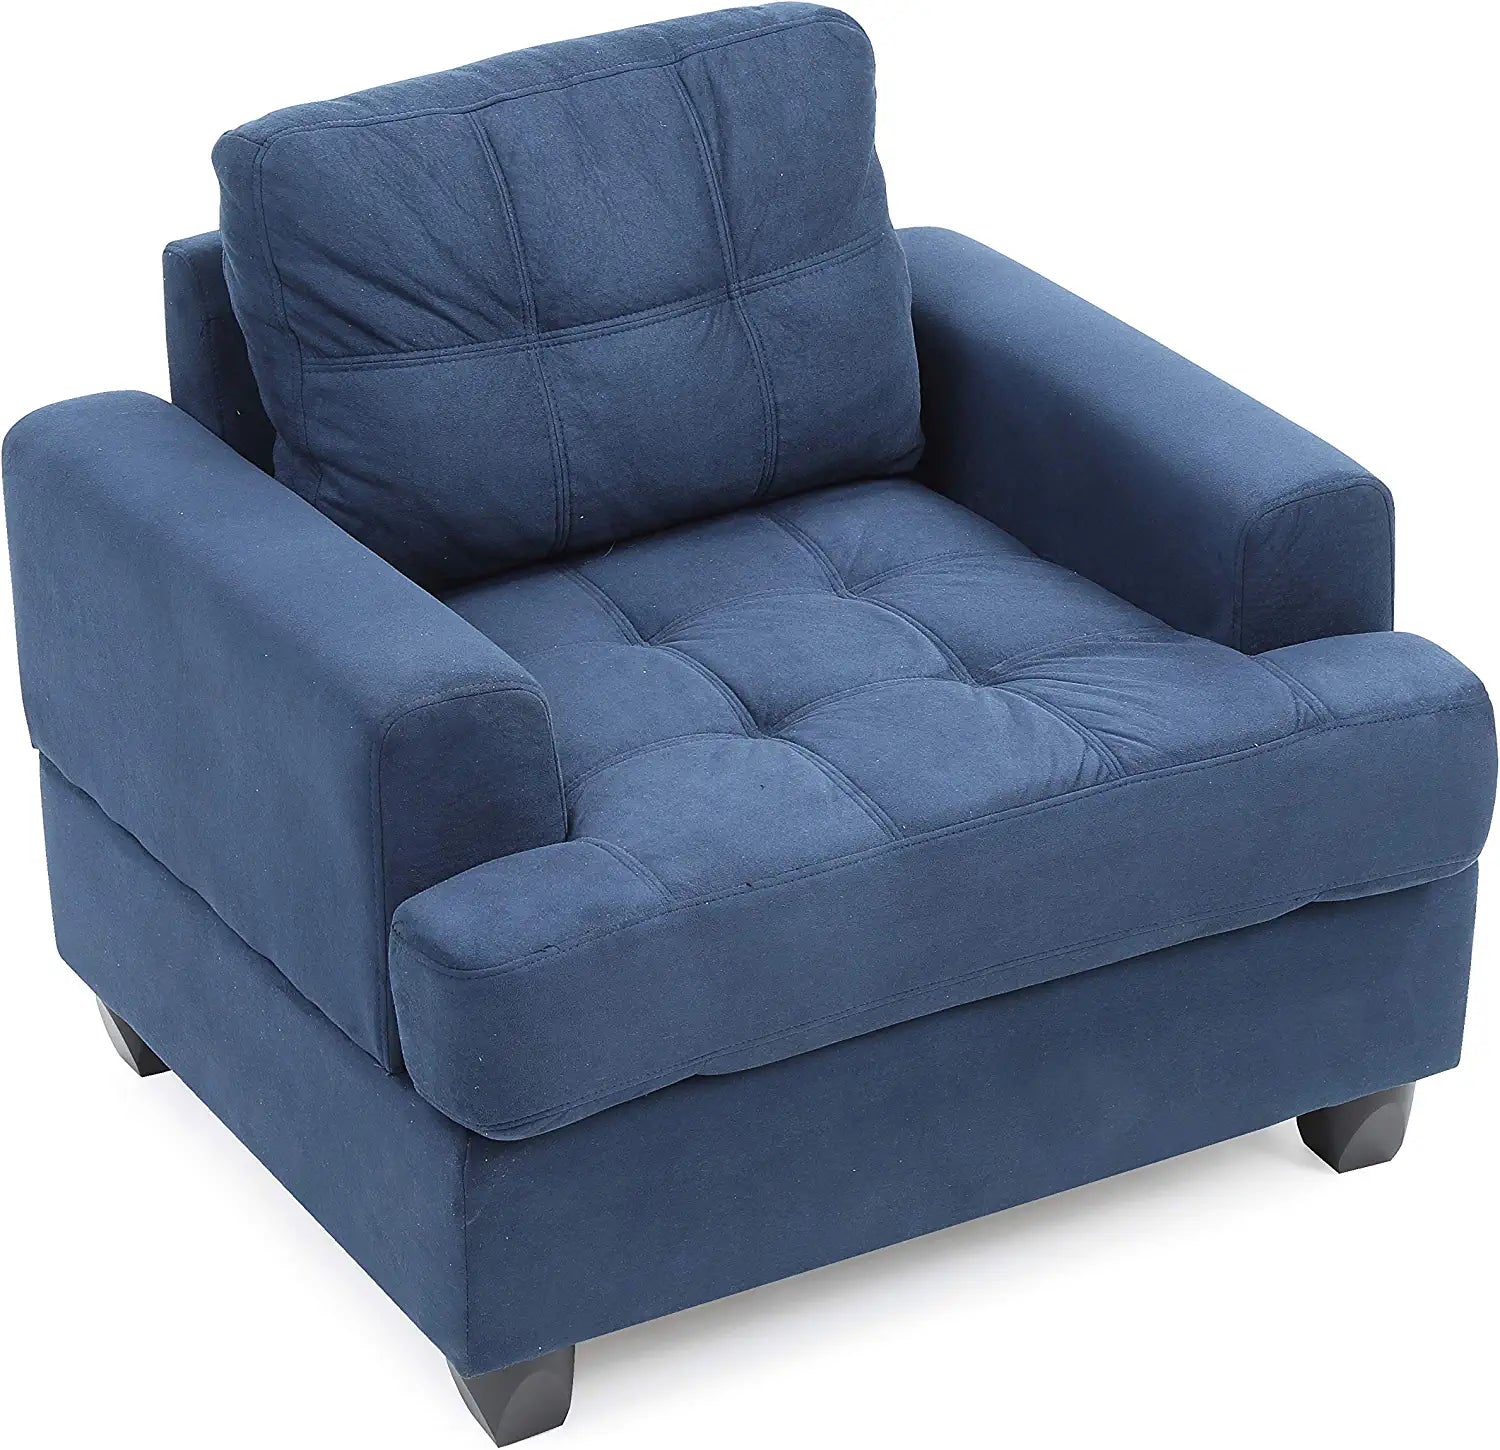 Glory Furniture G510A-C Living Room Chair, Navy Blue